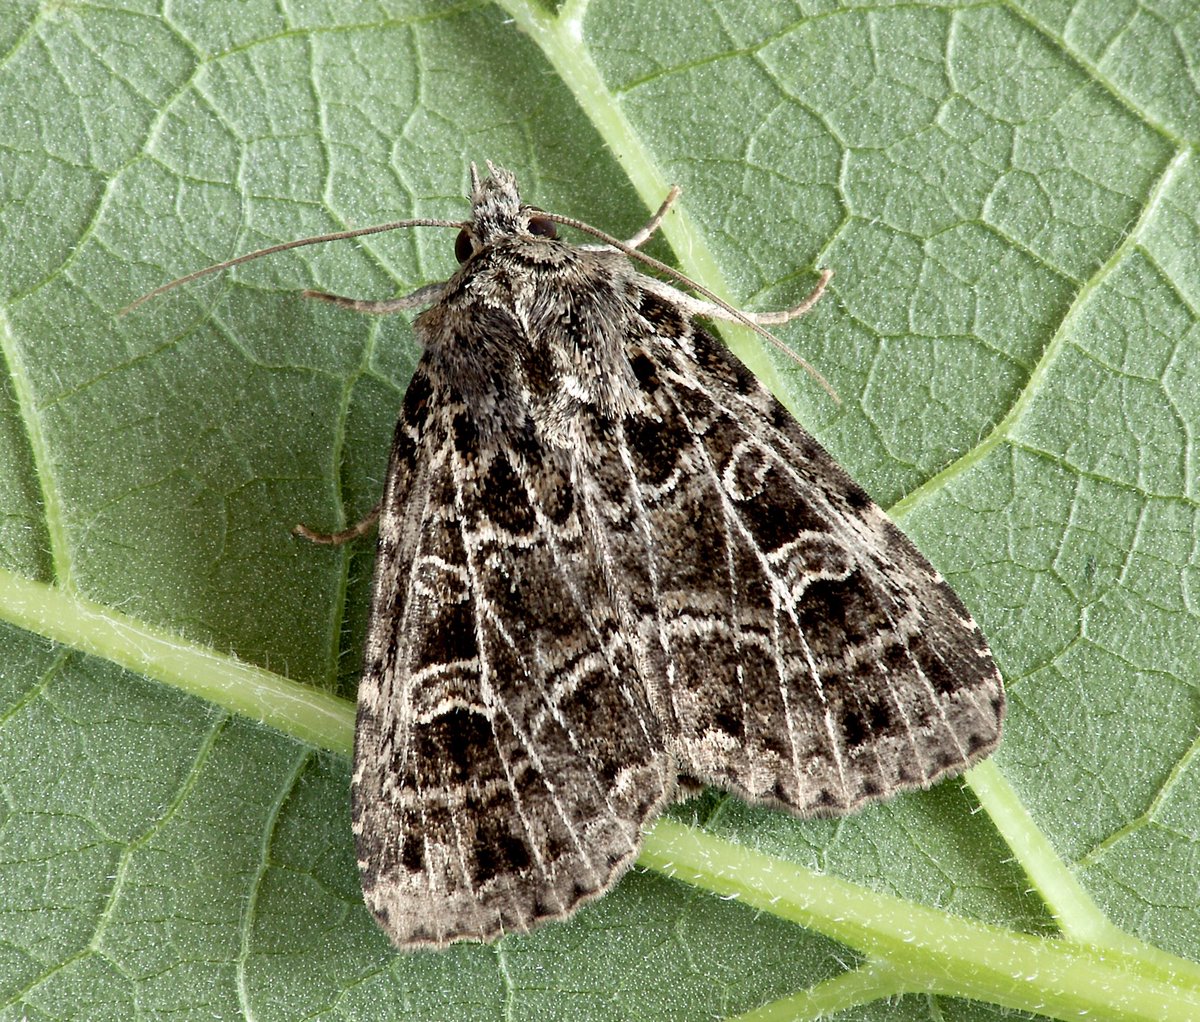 It’s #MothNight this week (Thurs-Sat) so our contribution to #MothMonday is a moth of marshes, meadows and other damp places, Gothic (Naenia typica). mothnight.info (📷Patrick Clement)